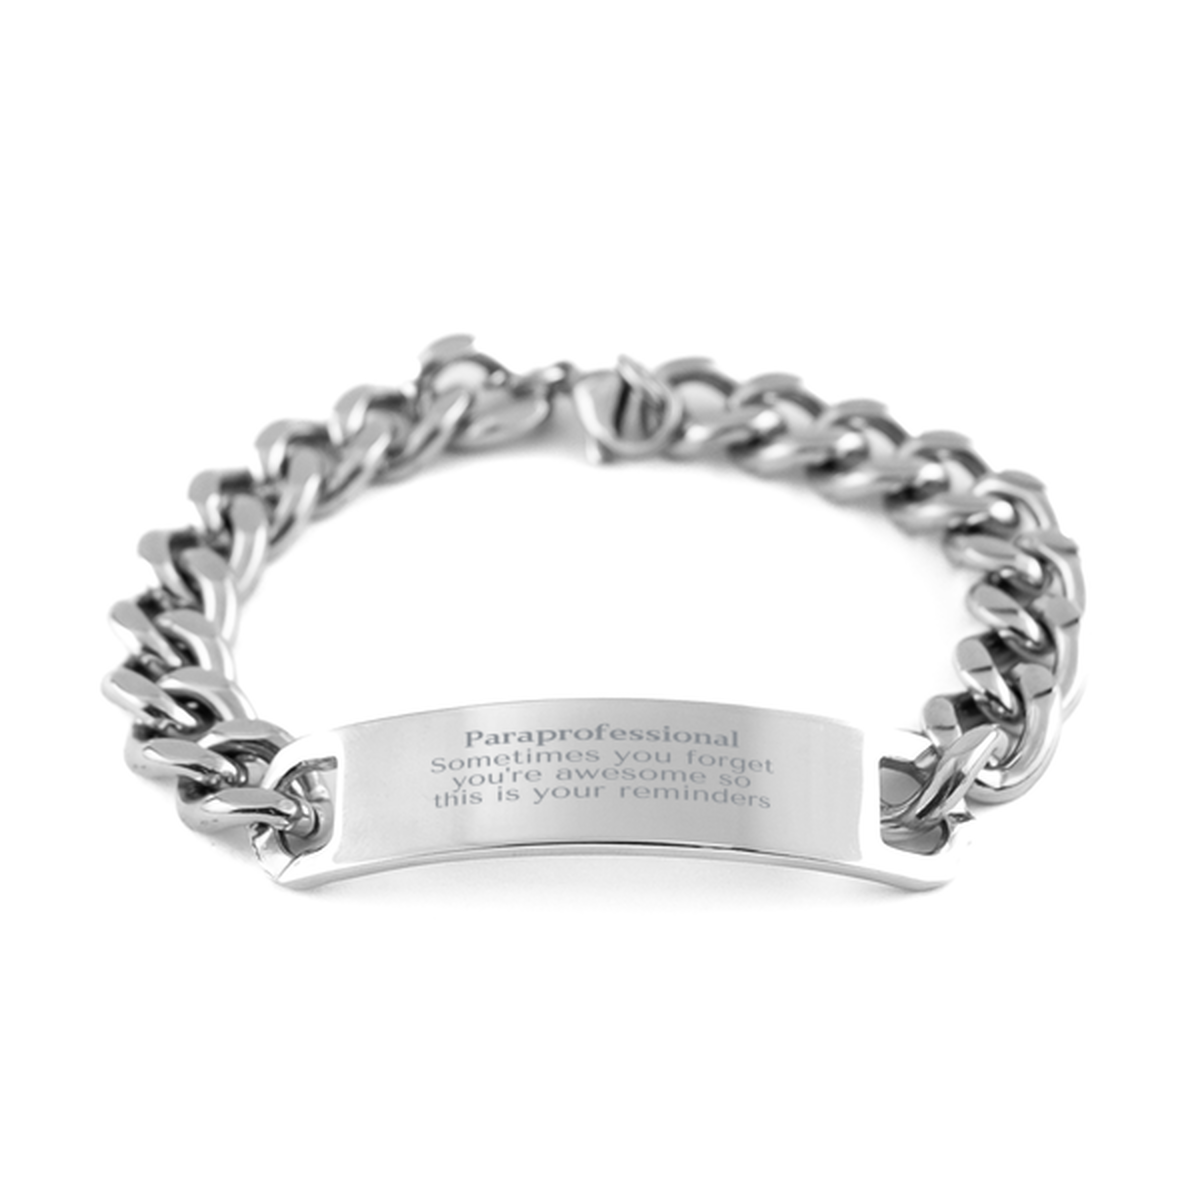 Sentimental Paraprofessional Cuban Chain Stainless Steel Bracelet, Paraprofessional Sometimes you forget you're awesome so this is your reminders, Graduation Christmas Birthday Gifts for Paraprofessional, Men, Women, Coworkers